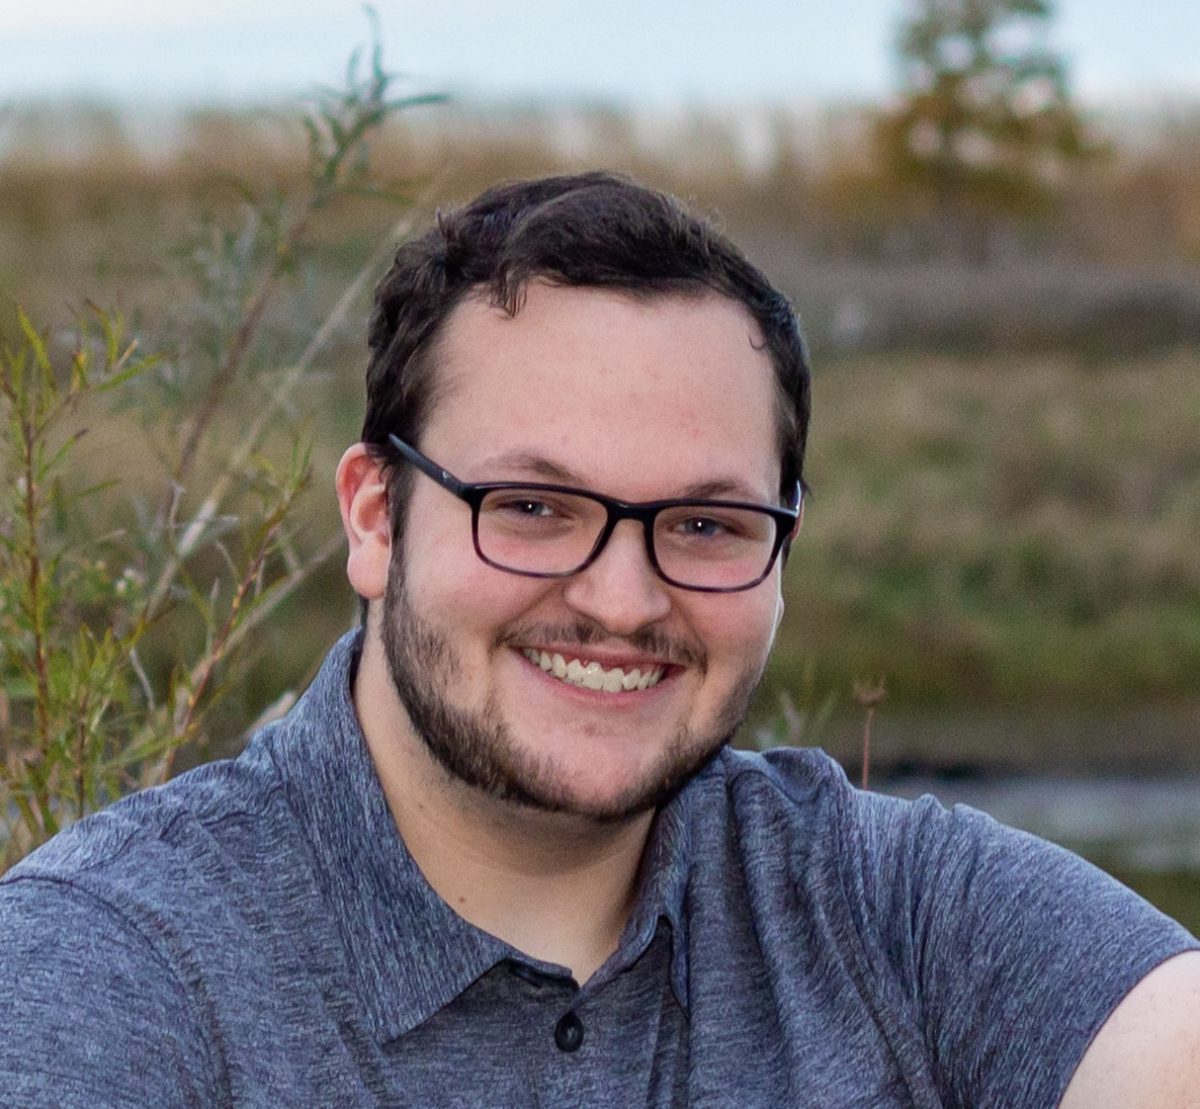 Erik Rolwes, a sophomore in industrial design, is running unopposed for the only StuGov seat representing the College of Design. The photo was provided by Rolwes.